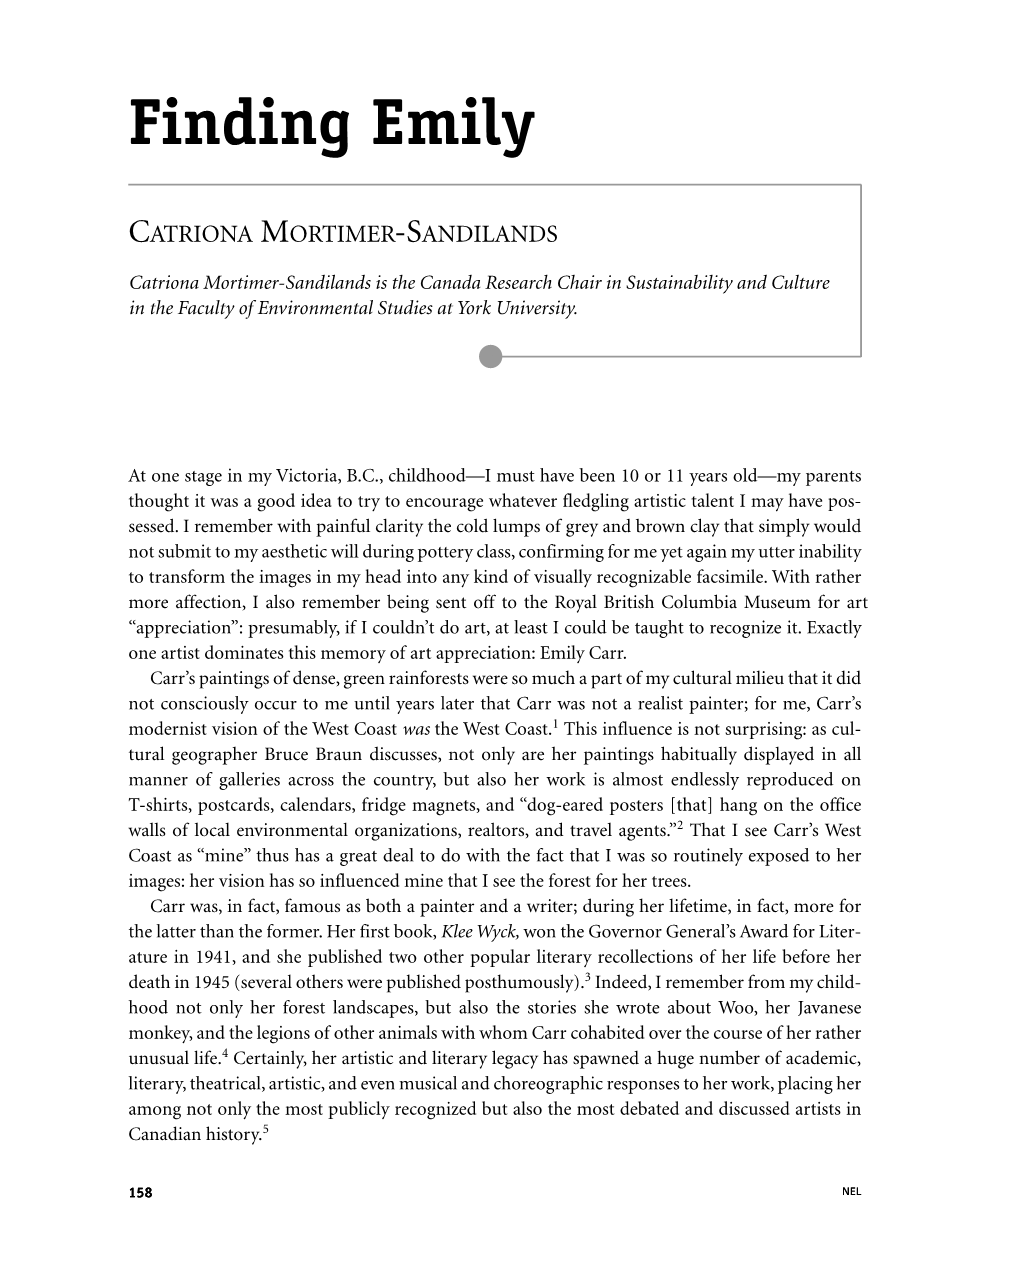 Finding Emily